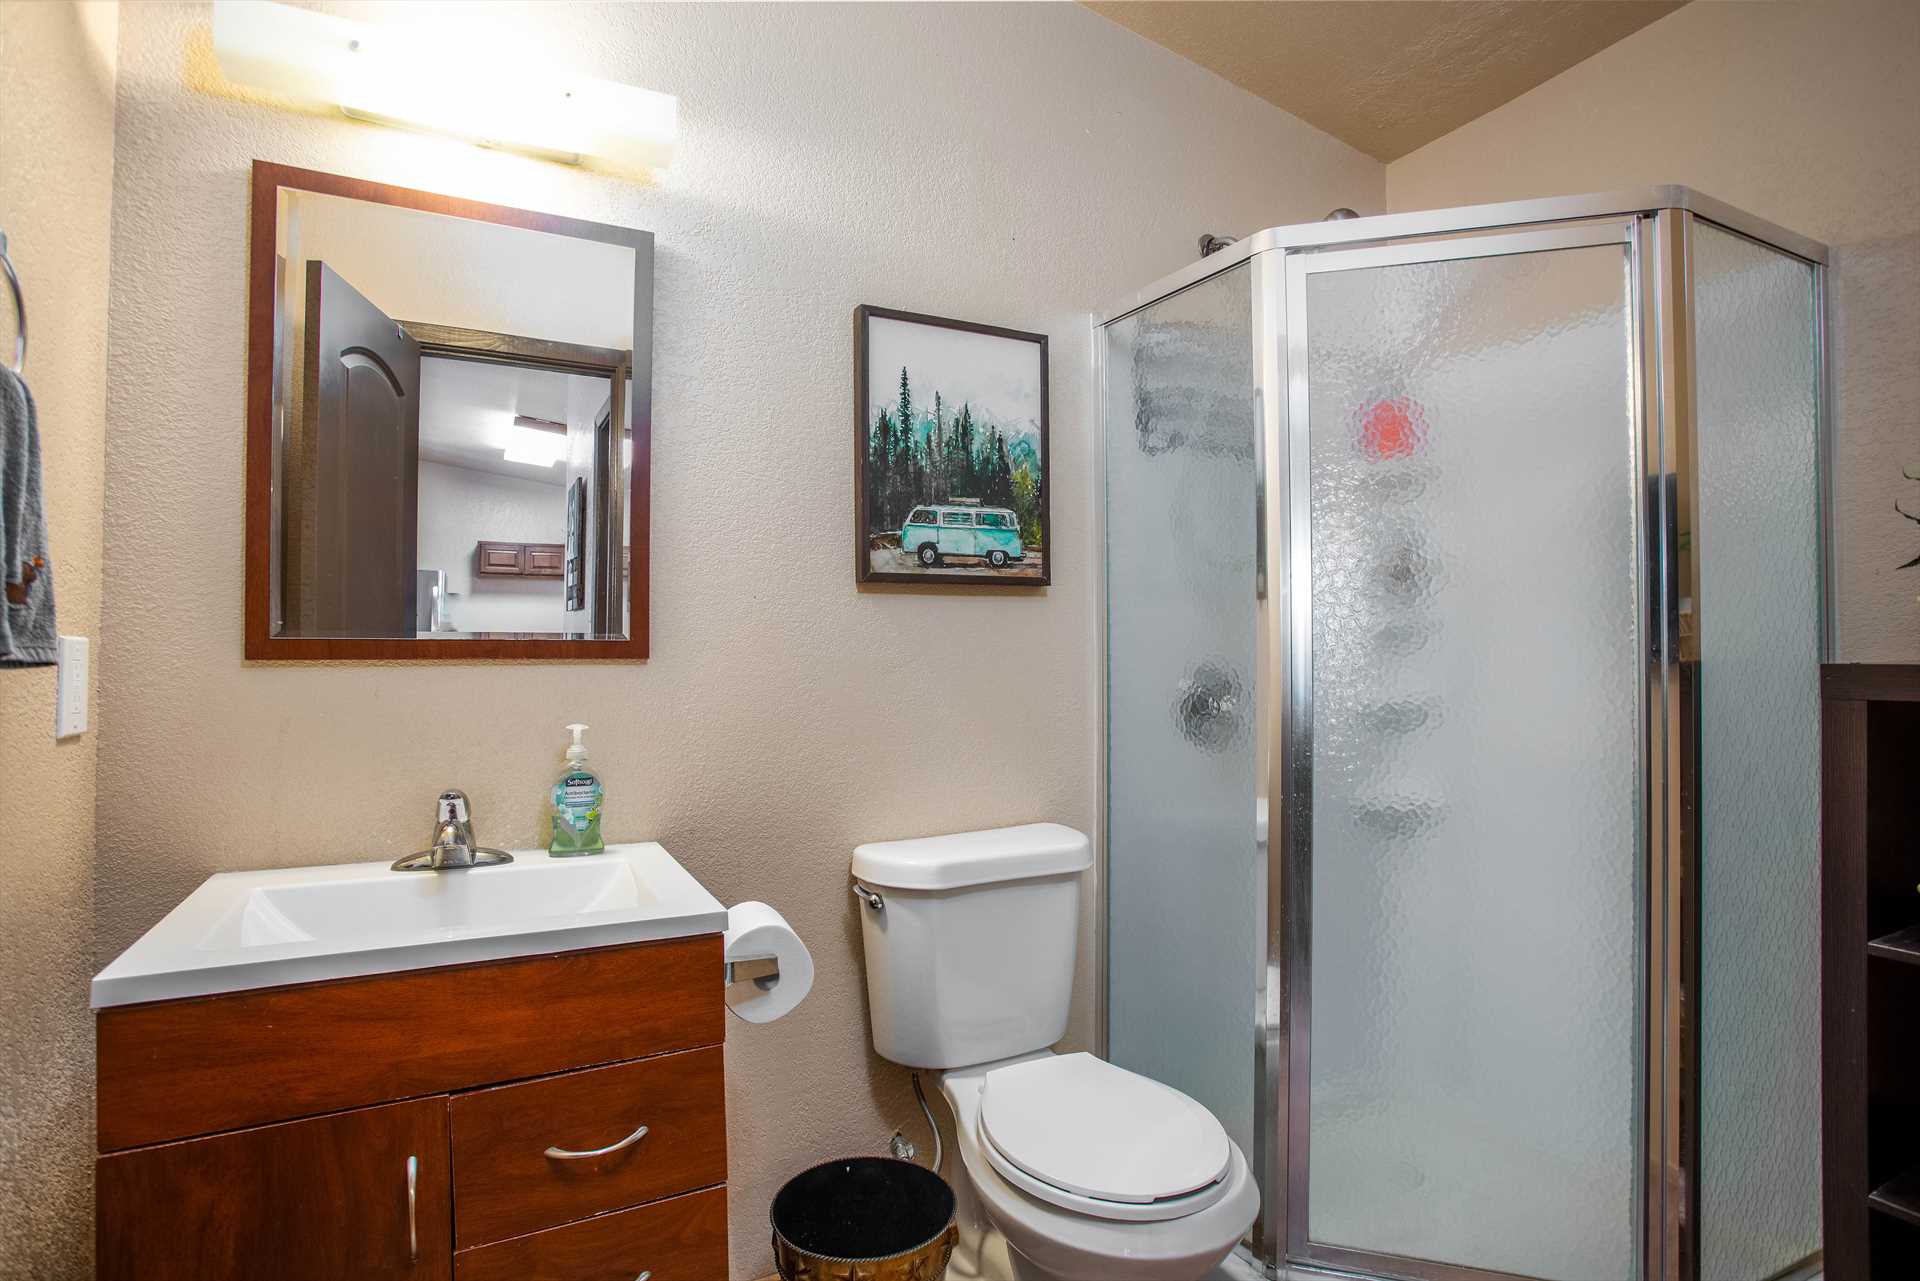                                                 The immaculate bath here features a roomy shower stall, and plenty of soft and fluffy linens for easy cleanup!